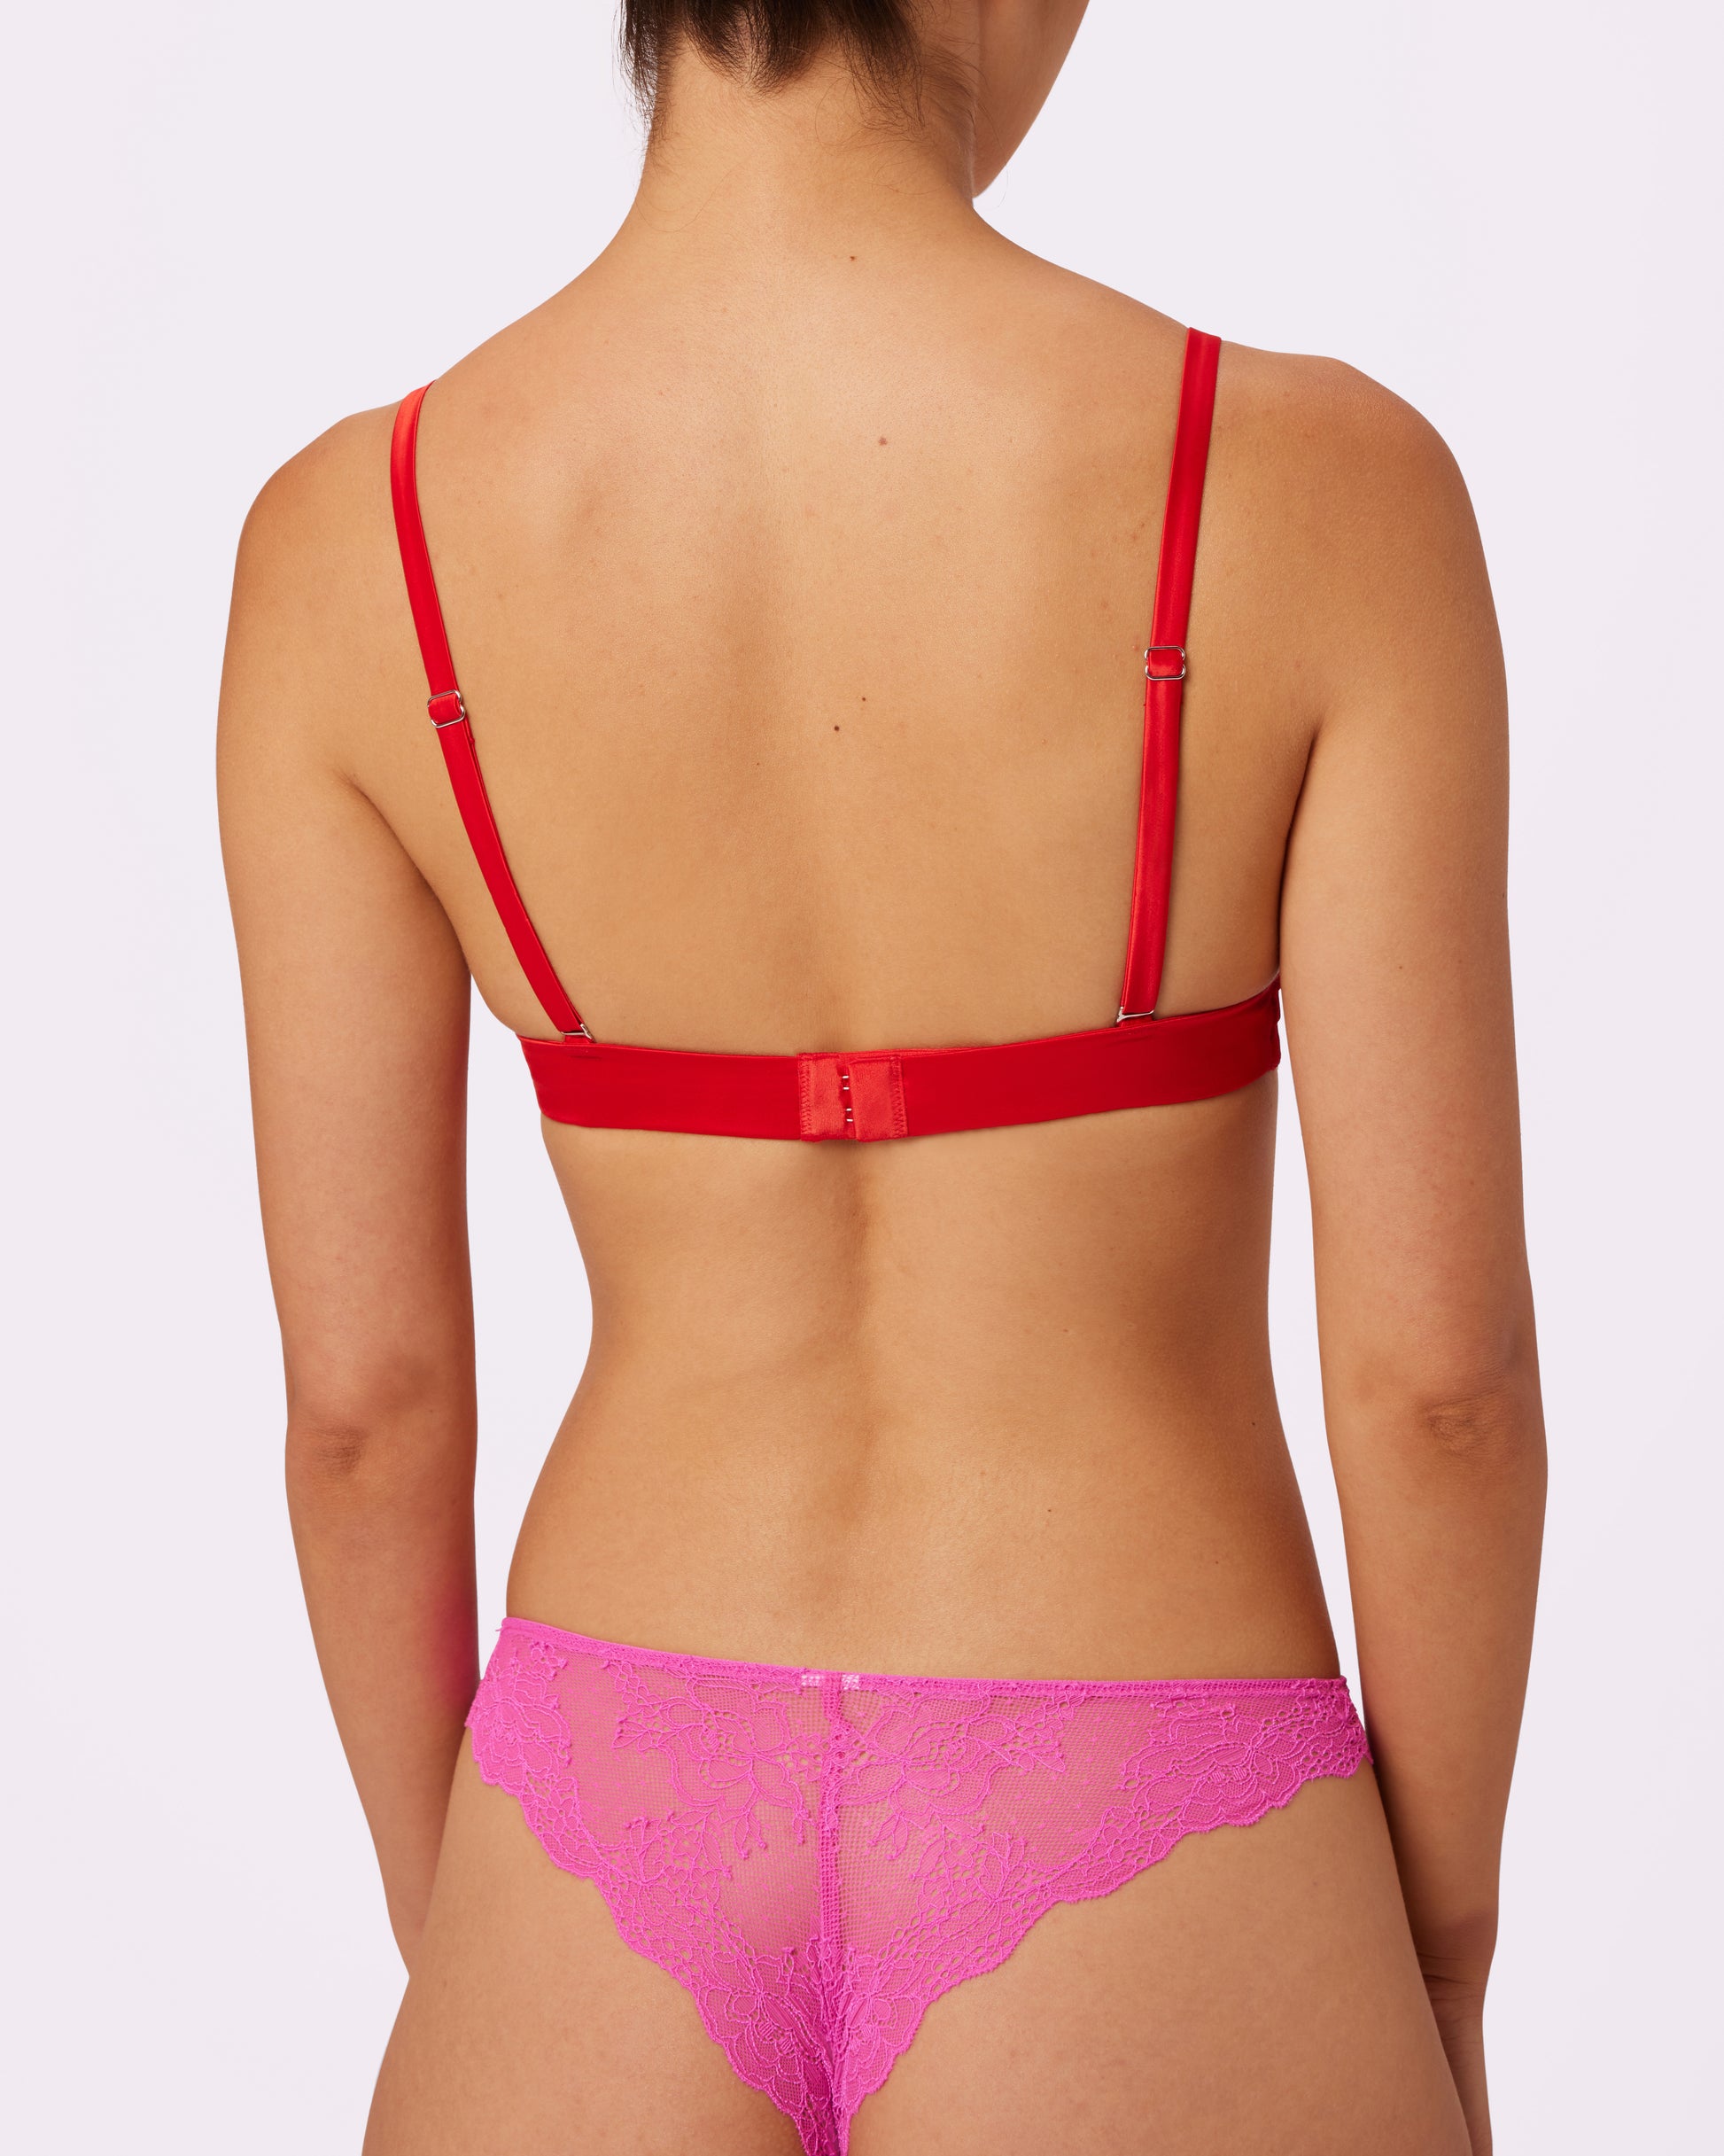 Buy Victoria's Secret PINK Lace Longline Bralette from the